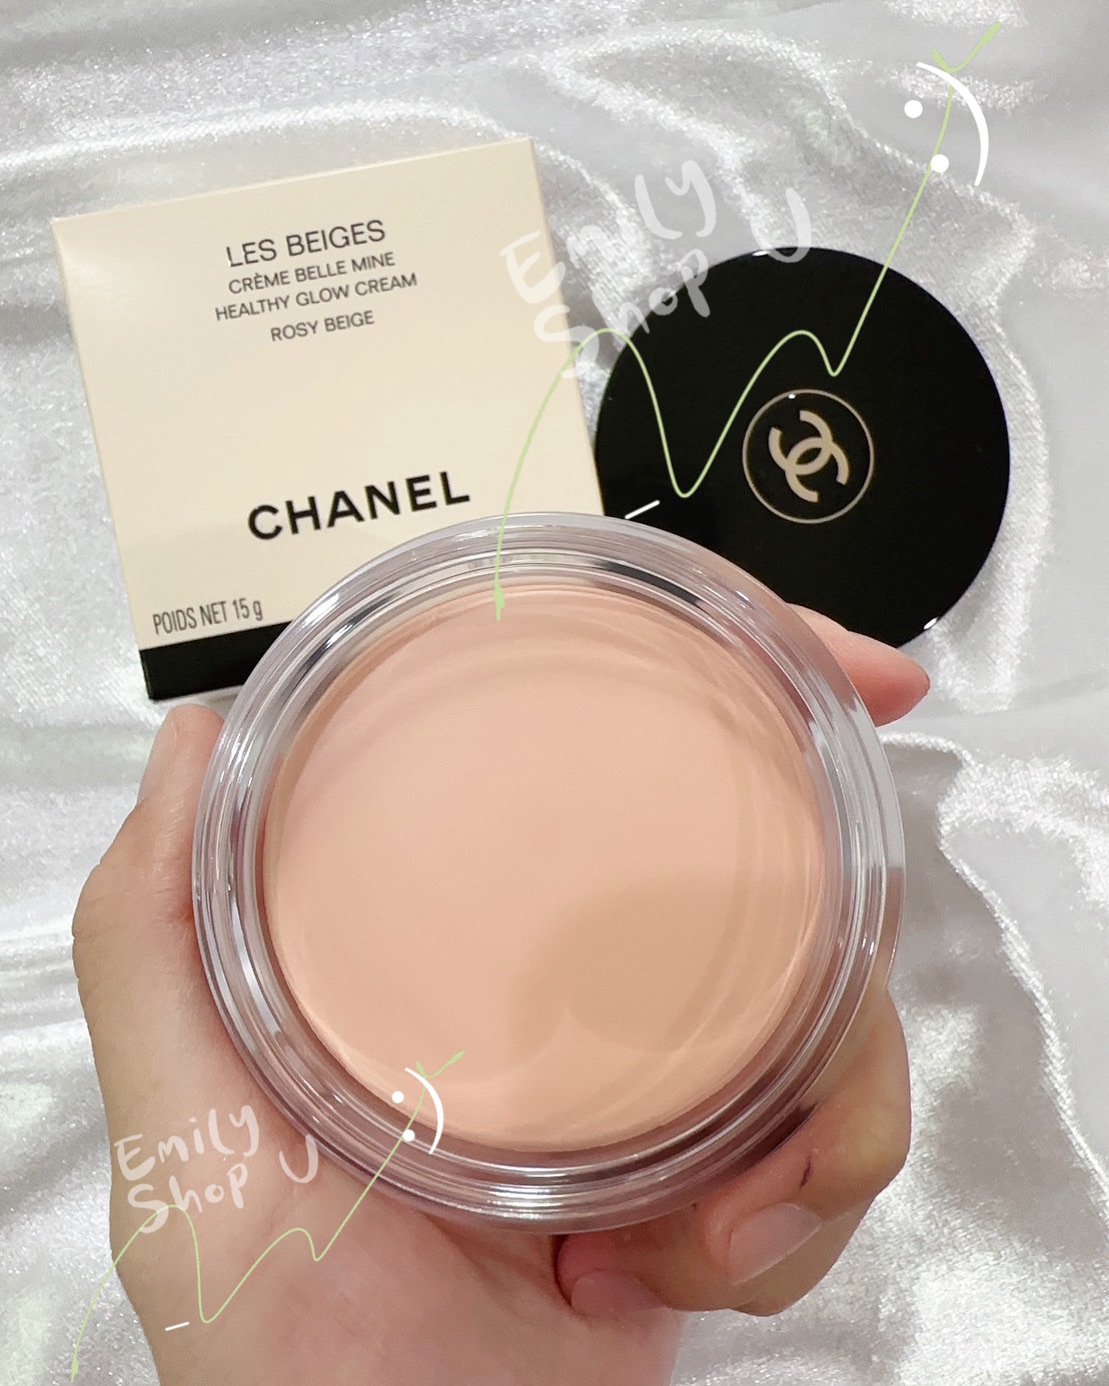 NEW CHANEL LES BEIGES HEALTHY GLOW CREAM ROSY BEIGE 